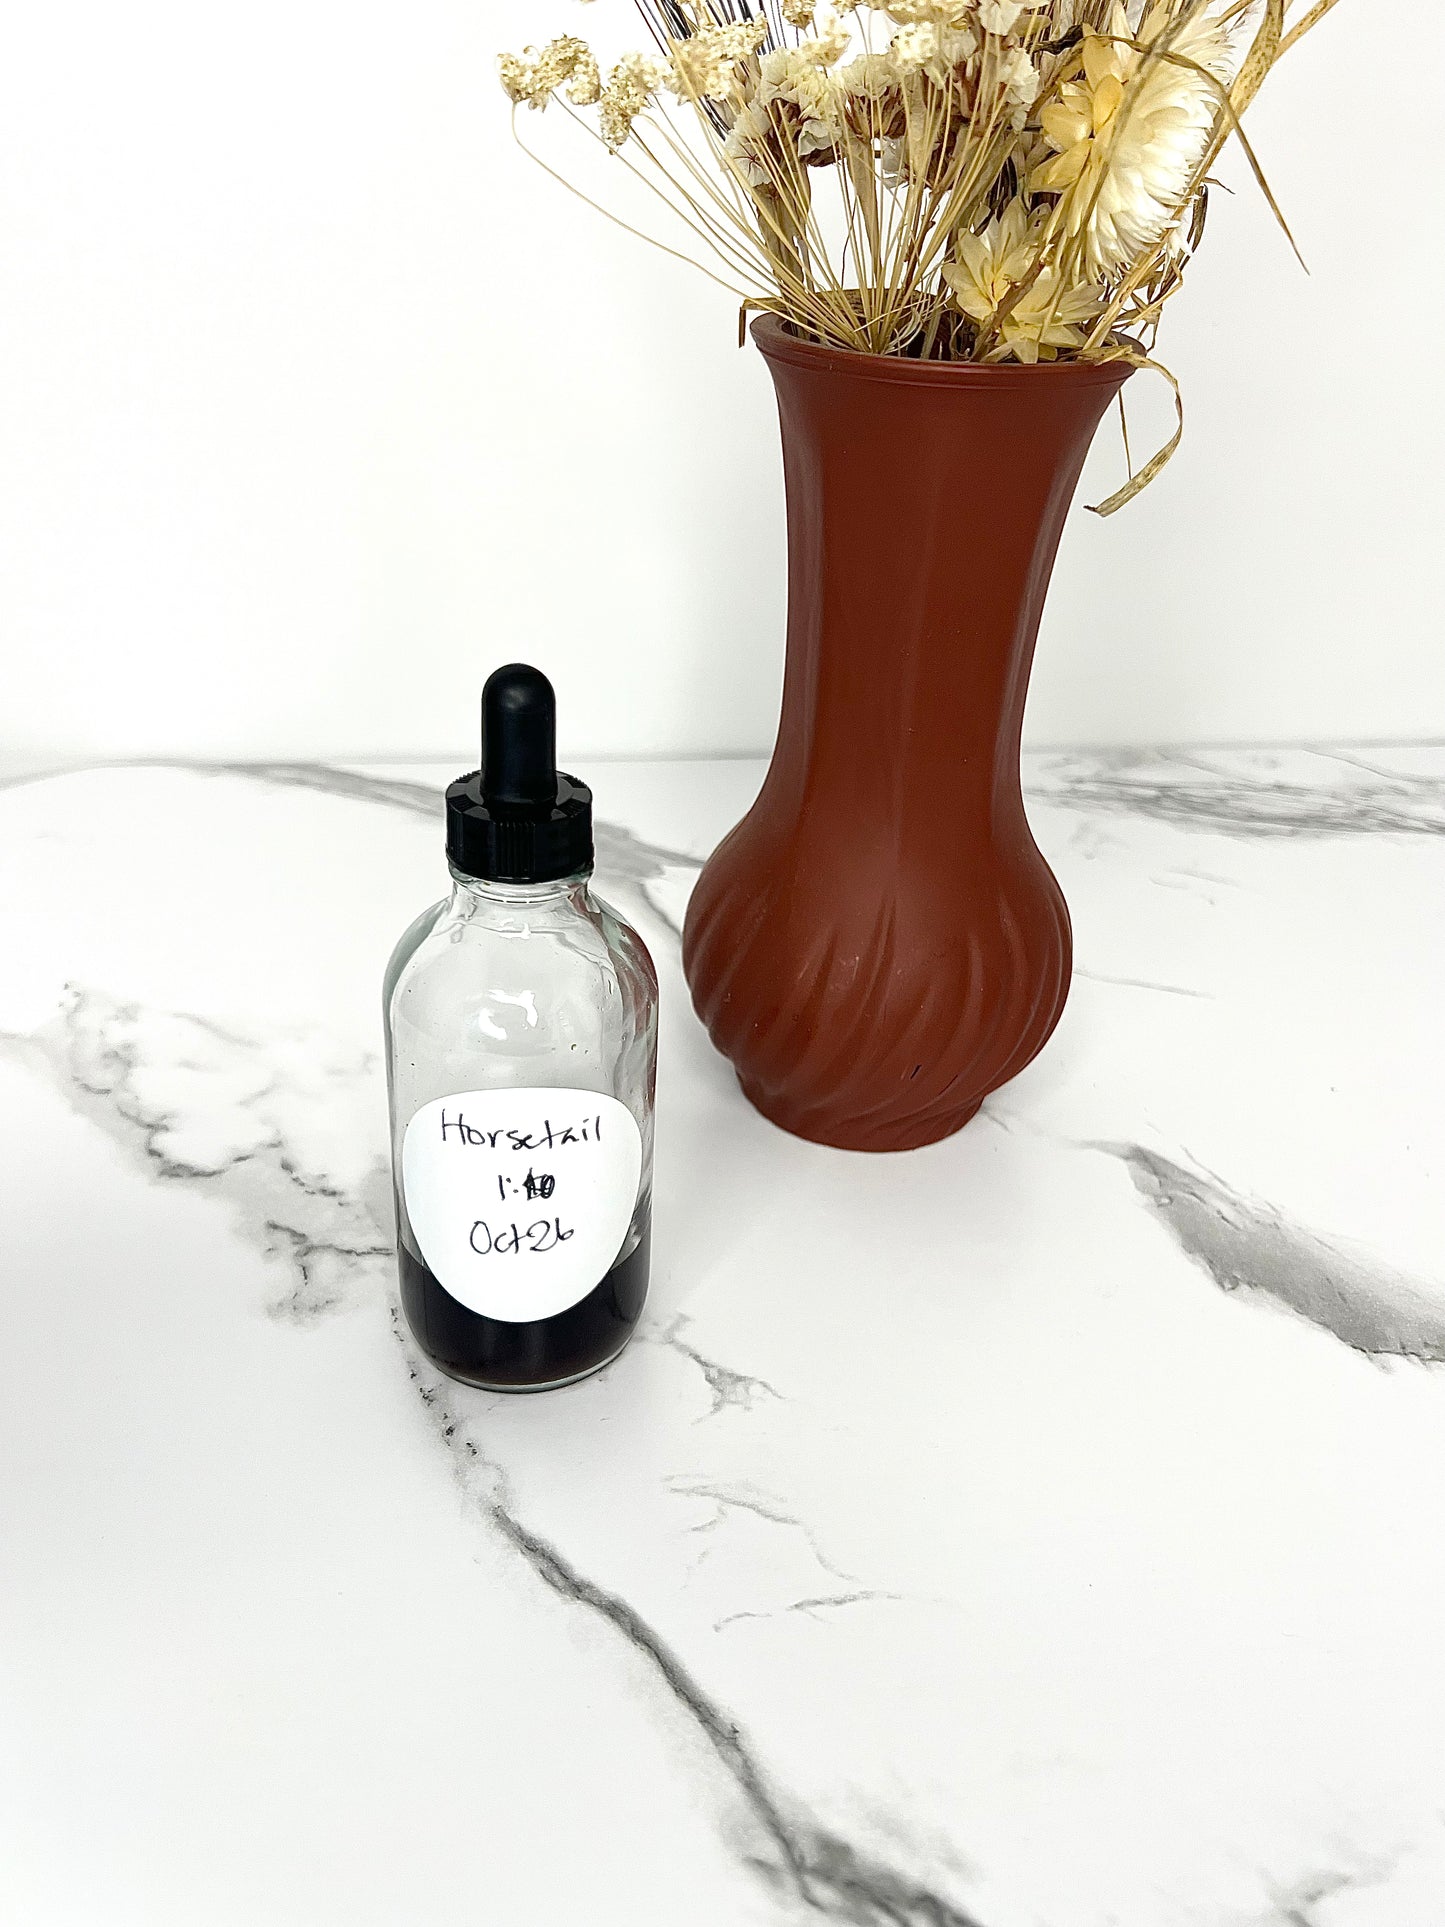 Horsetail Tincture - Product Image For Mangata Dispensary